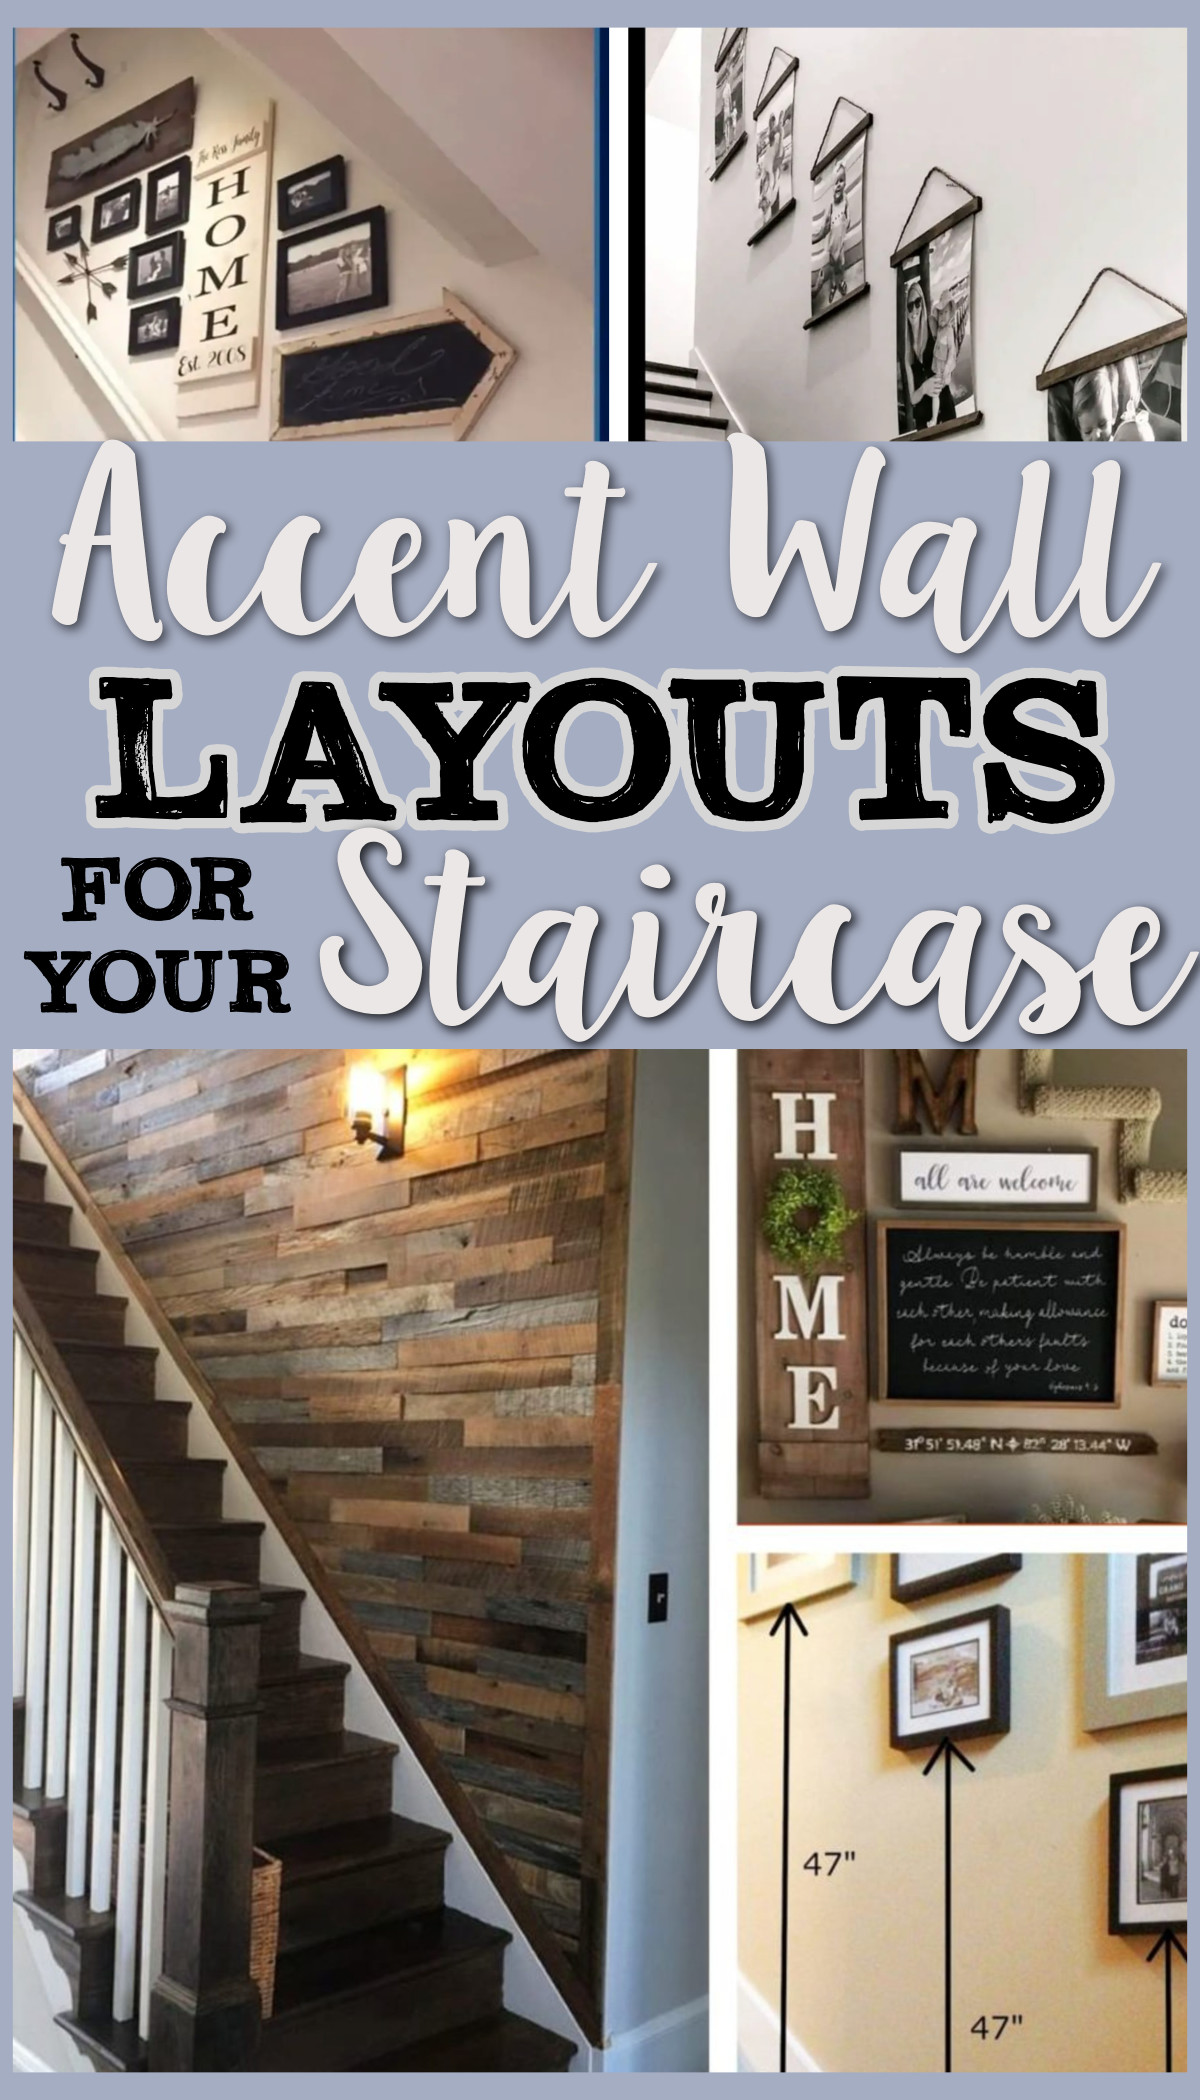 accent wall ideas for staircase walls